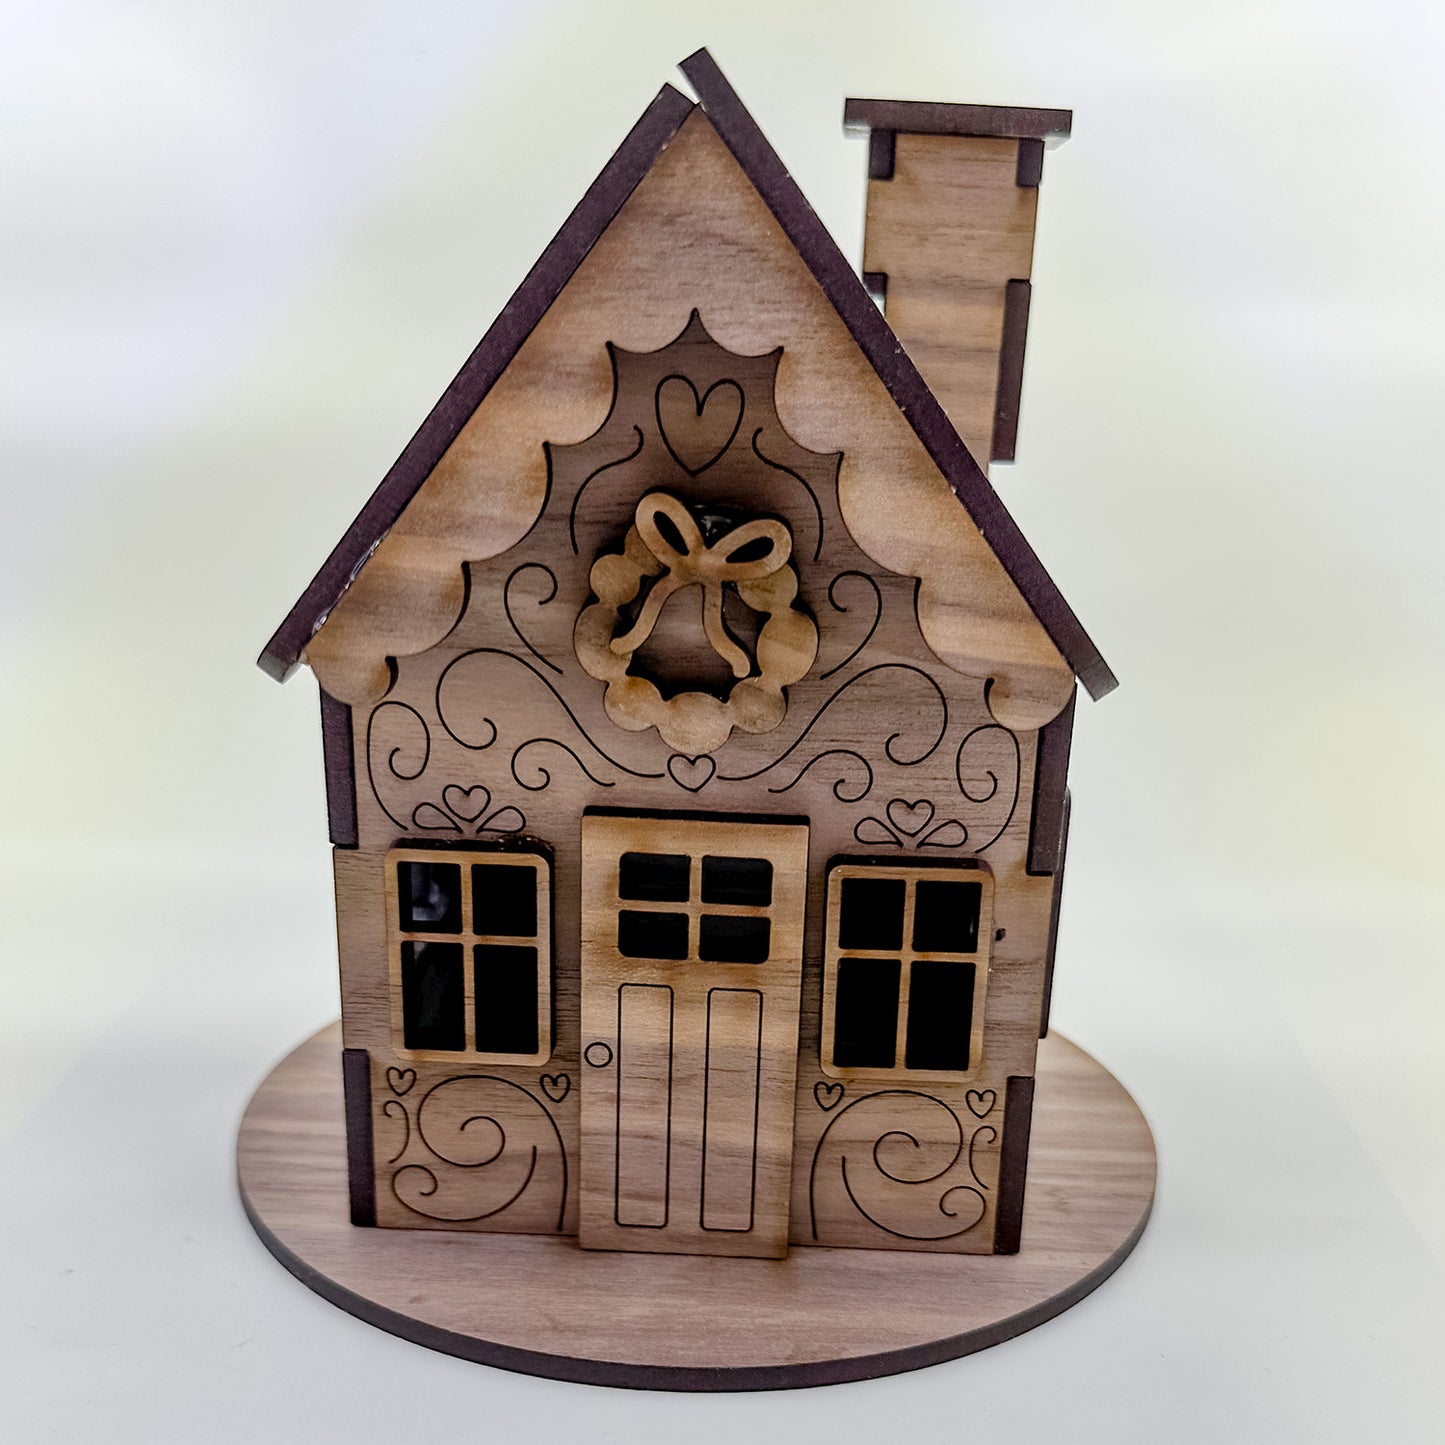 3D Gingerbread House Christmas Village House Large Christmas Ornament